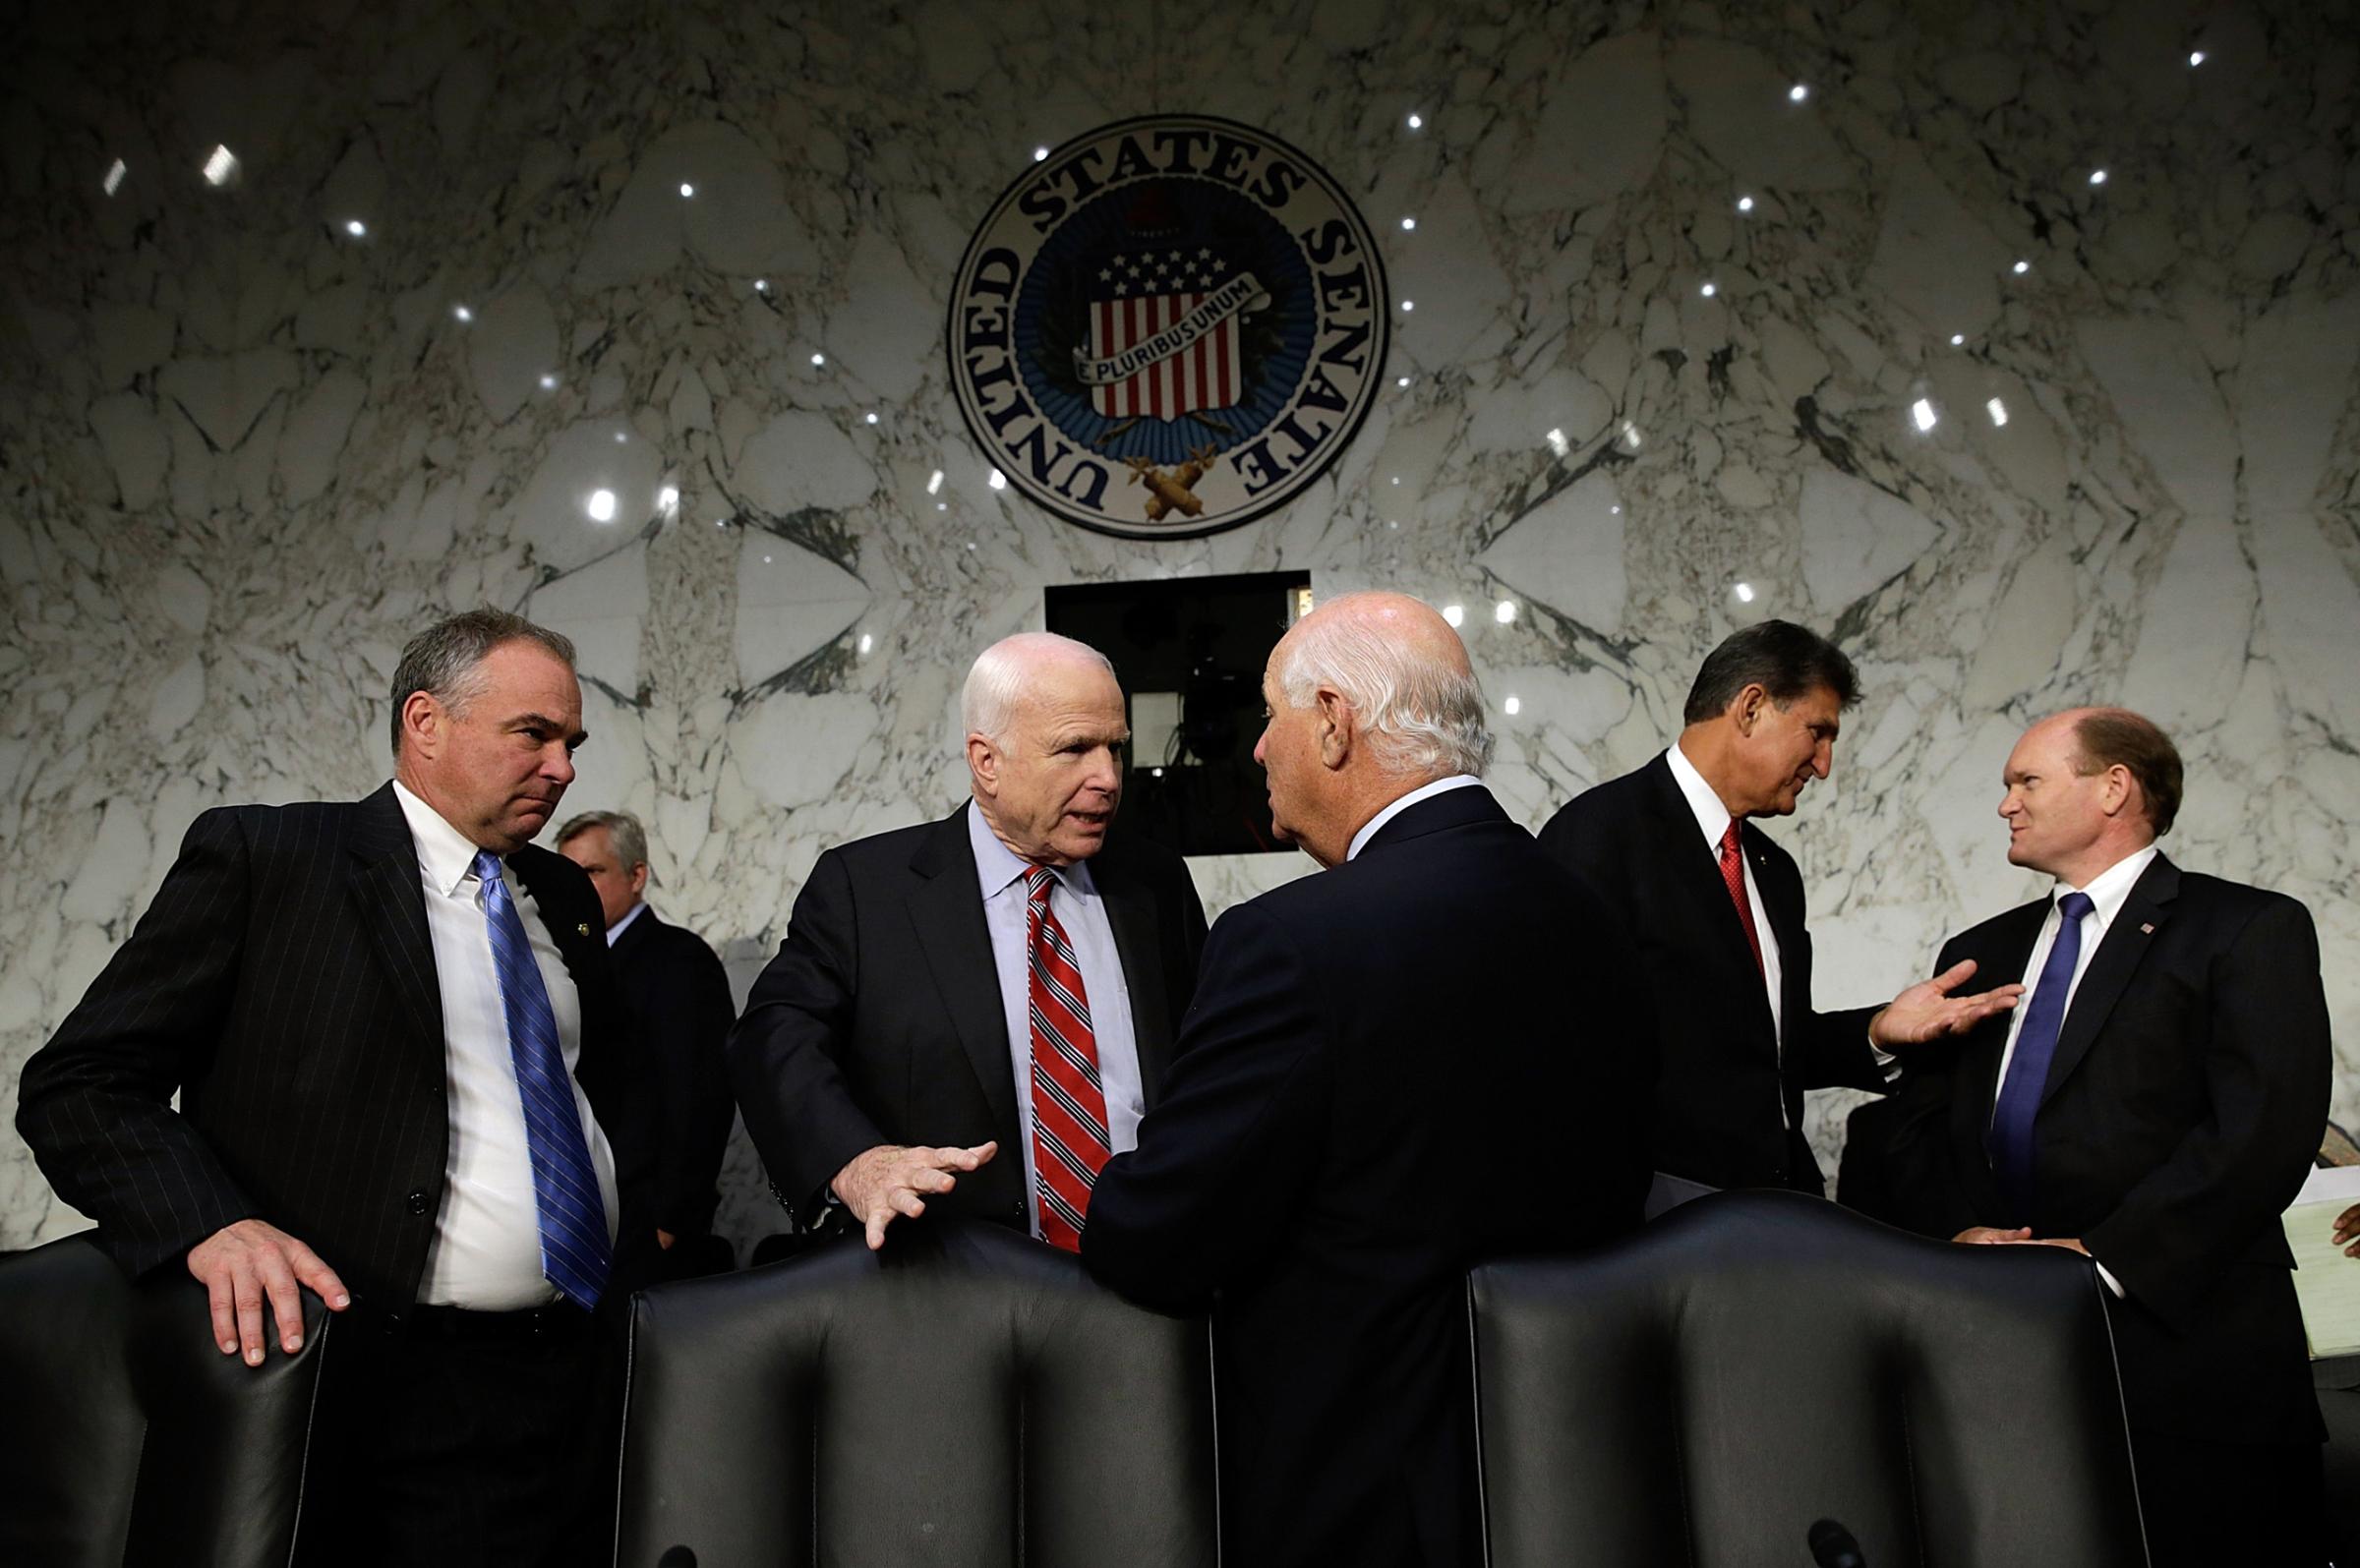 U.S. Sen. Tim Kaine, Sen. John McCain, Sen. Ben Cardin, Sen. Joe Manchin and Sen. Chris Coons confer before the testimony of U.S. Secretary of State John Kerry, U.S. Defense Secretary Chuck Hagel, and U.S. Chairman of the Joint Chiefs of Staff Gen. Martin Dempsey as they appear before the Senate Foreign Relations Committee on the topic of "The Authorization of Use of Force in Syria" in Washington on Sept. 3, 2013.